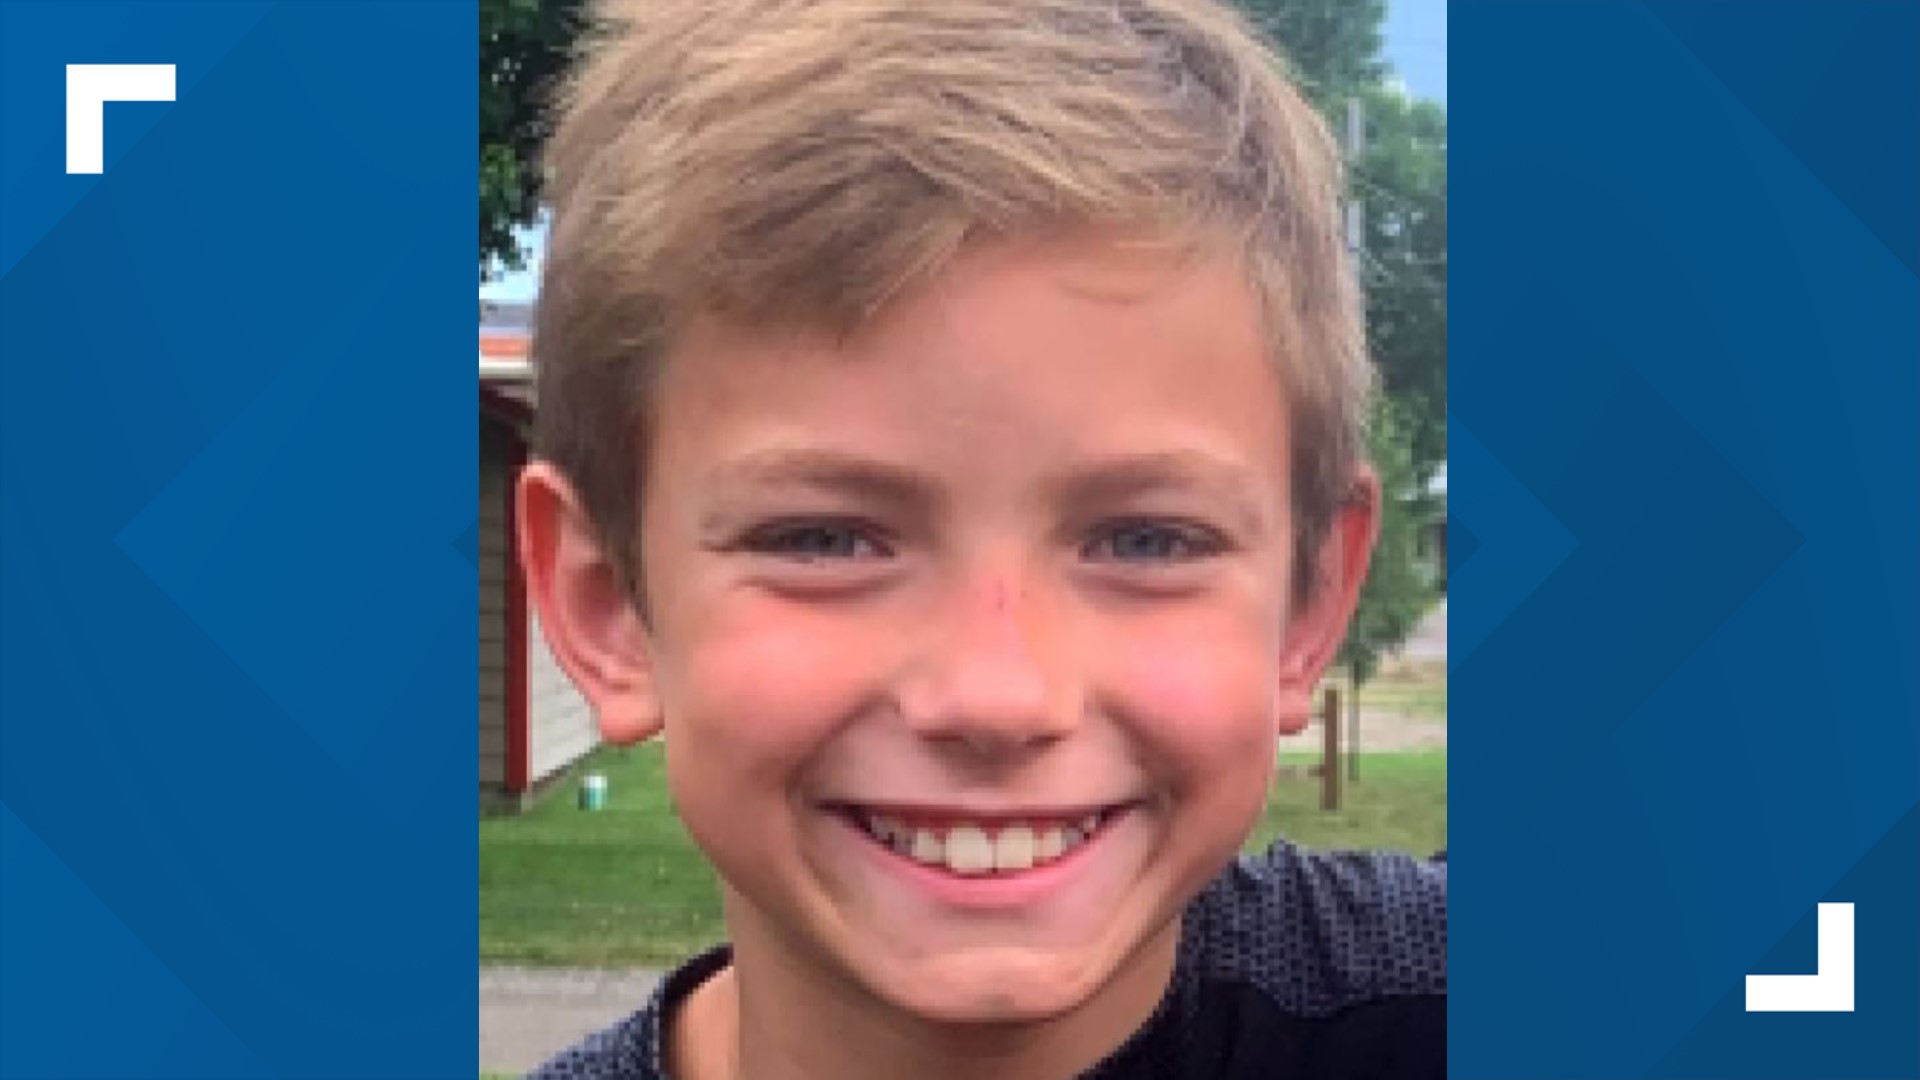 Jackson Weis was killed in a car accident in July. The 9-year-old was a rising hockey and soccer player.